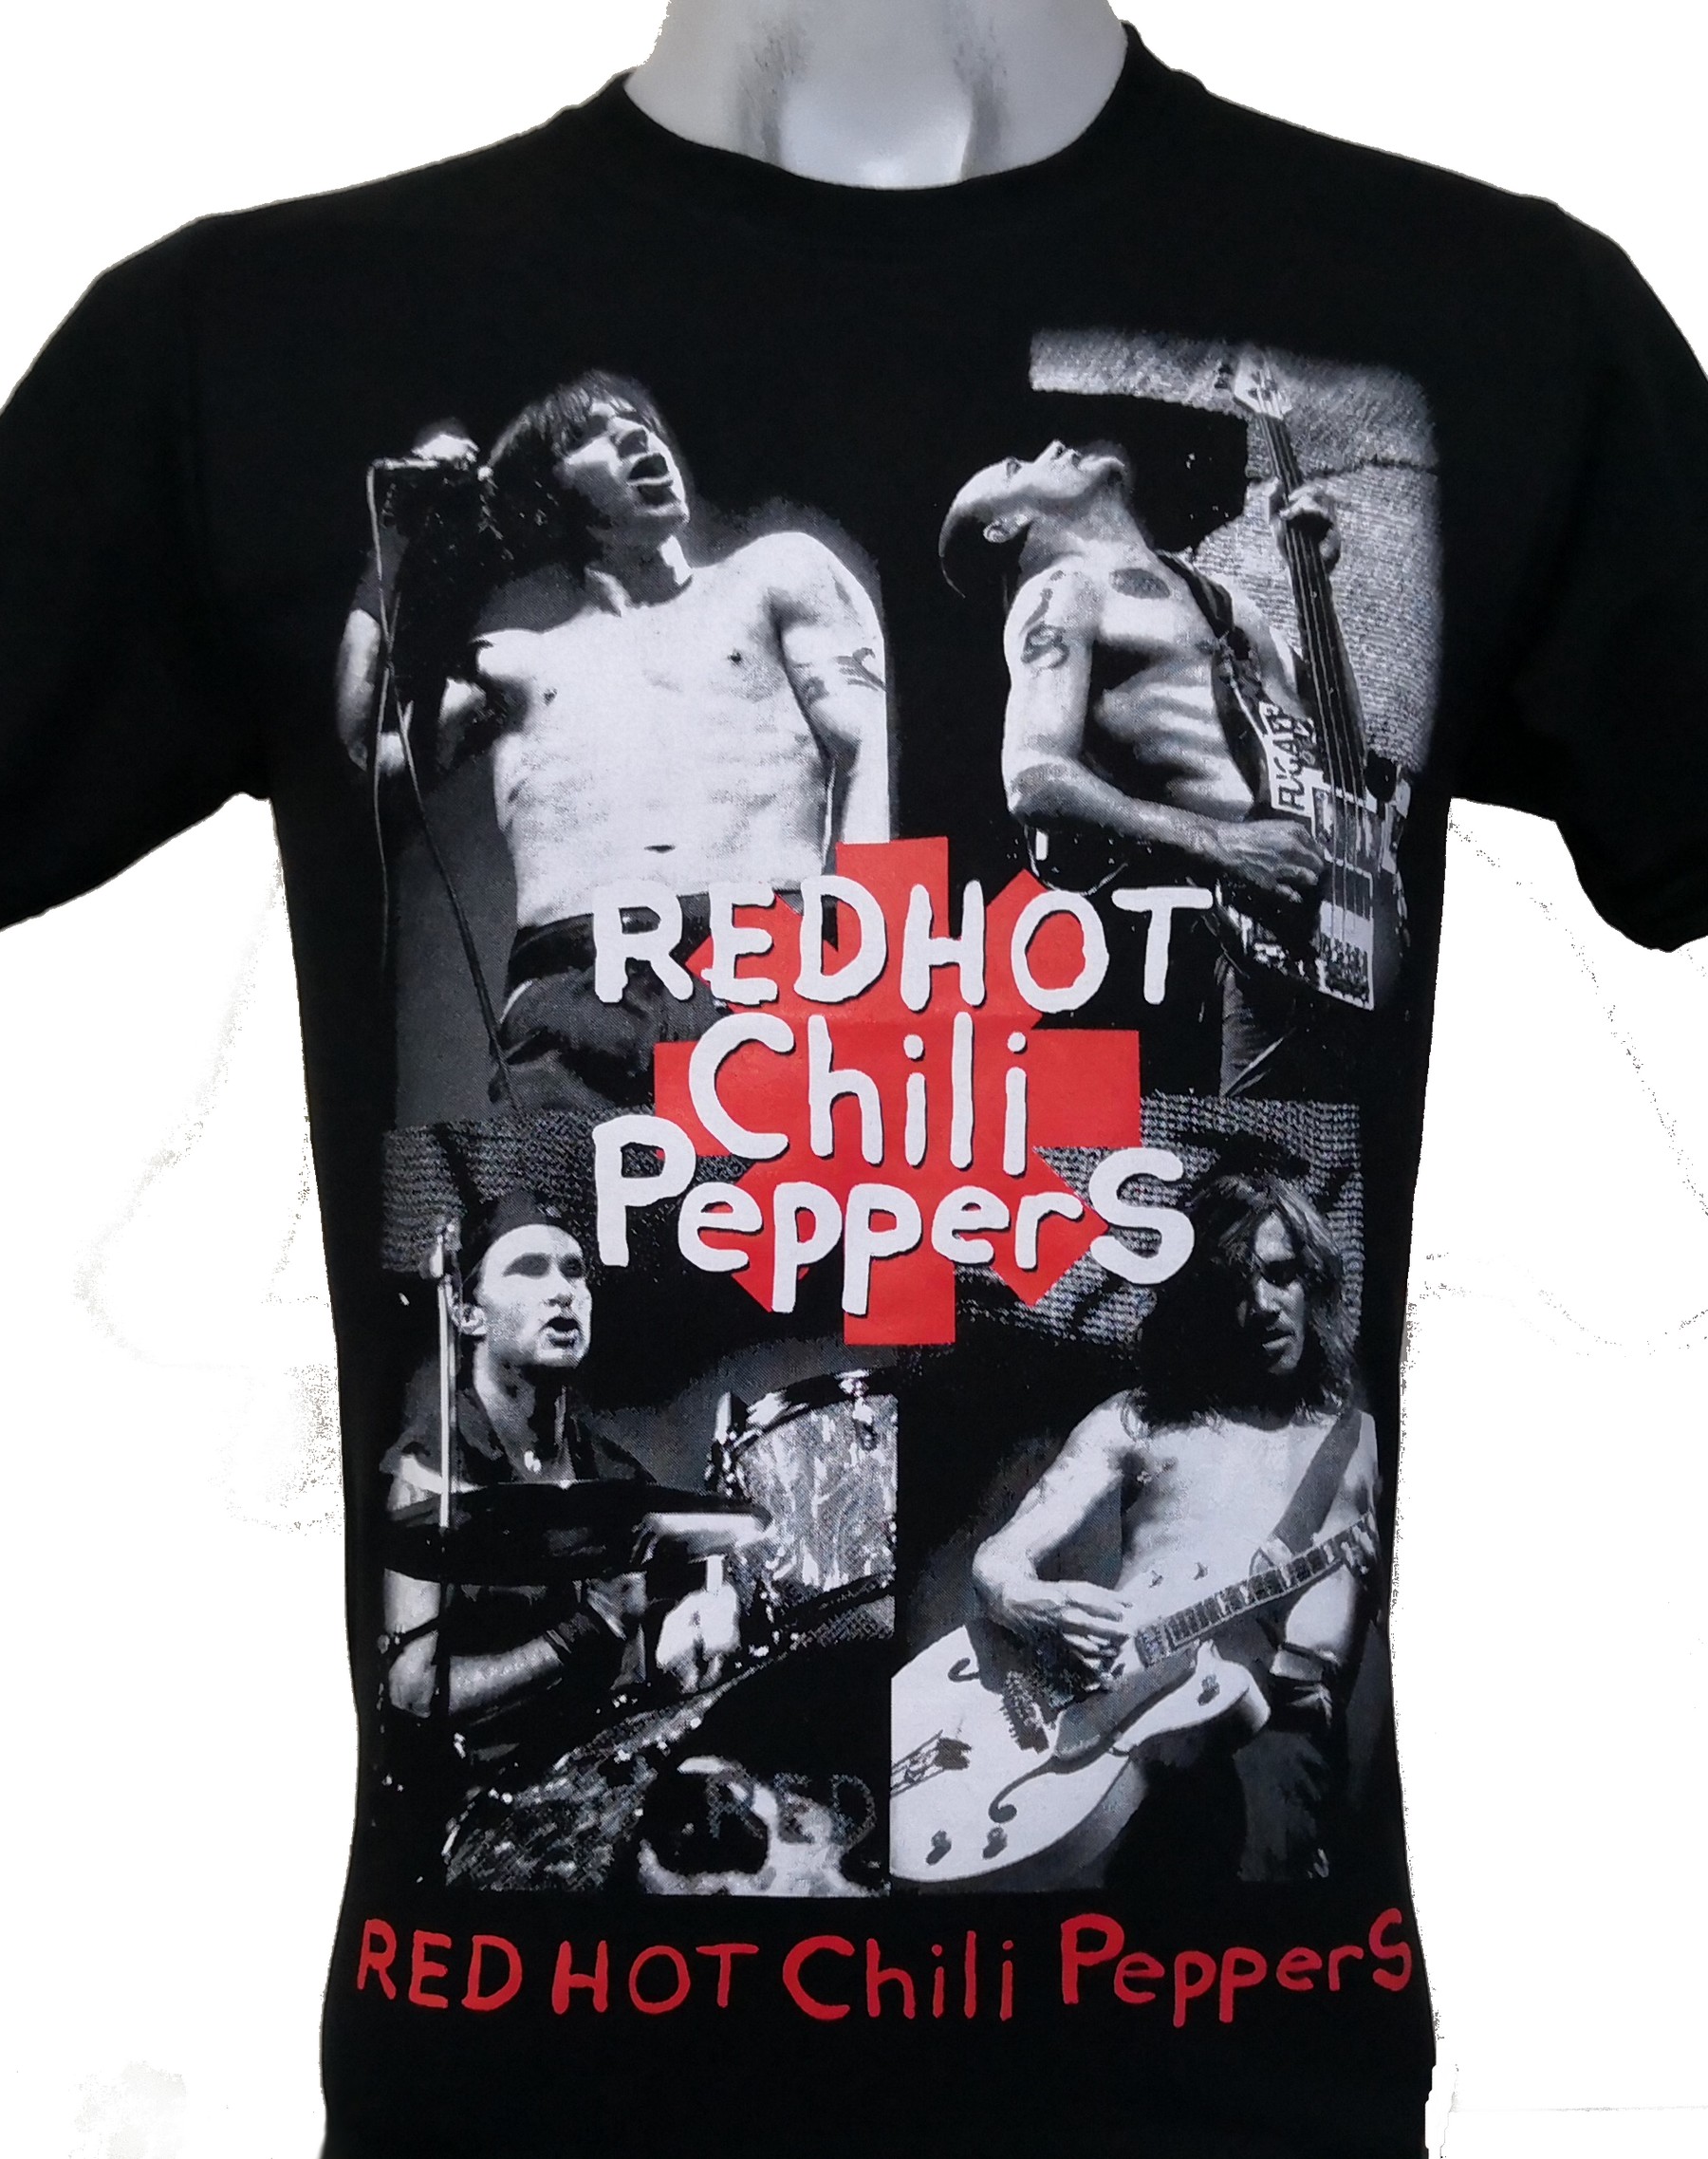 Red Hot Chili Peppers t-shirt size XL